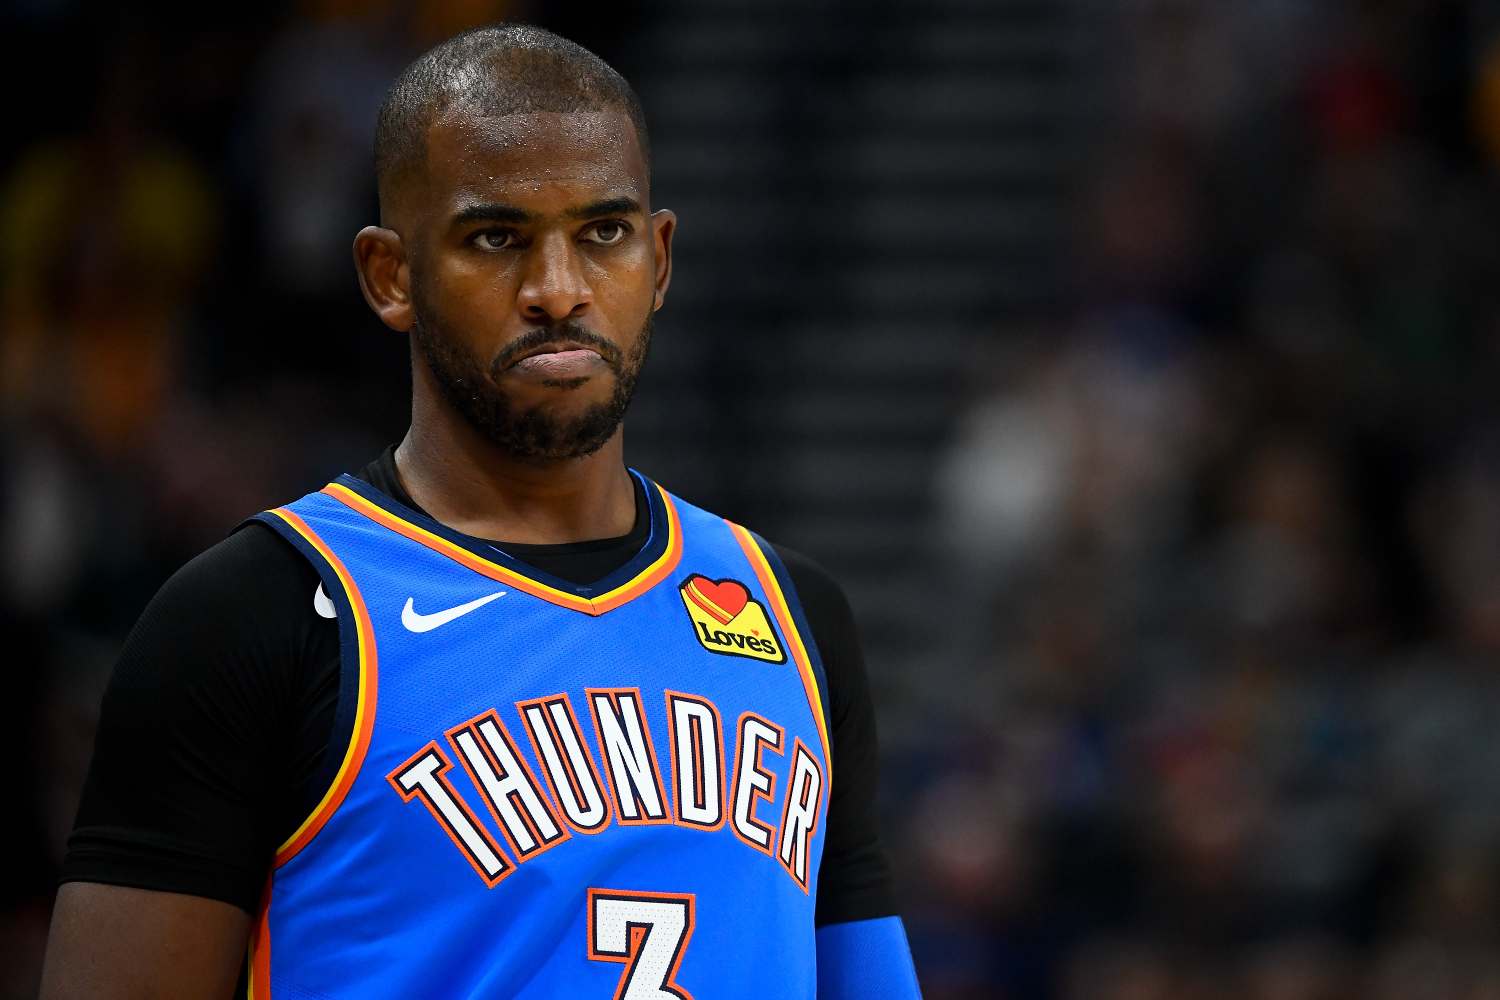 Chris Paul looks on during a Thunder game